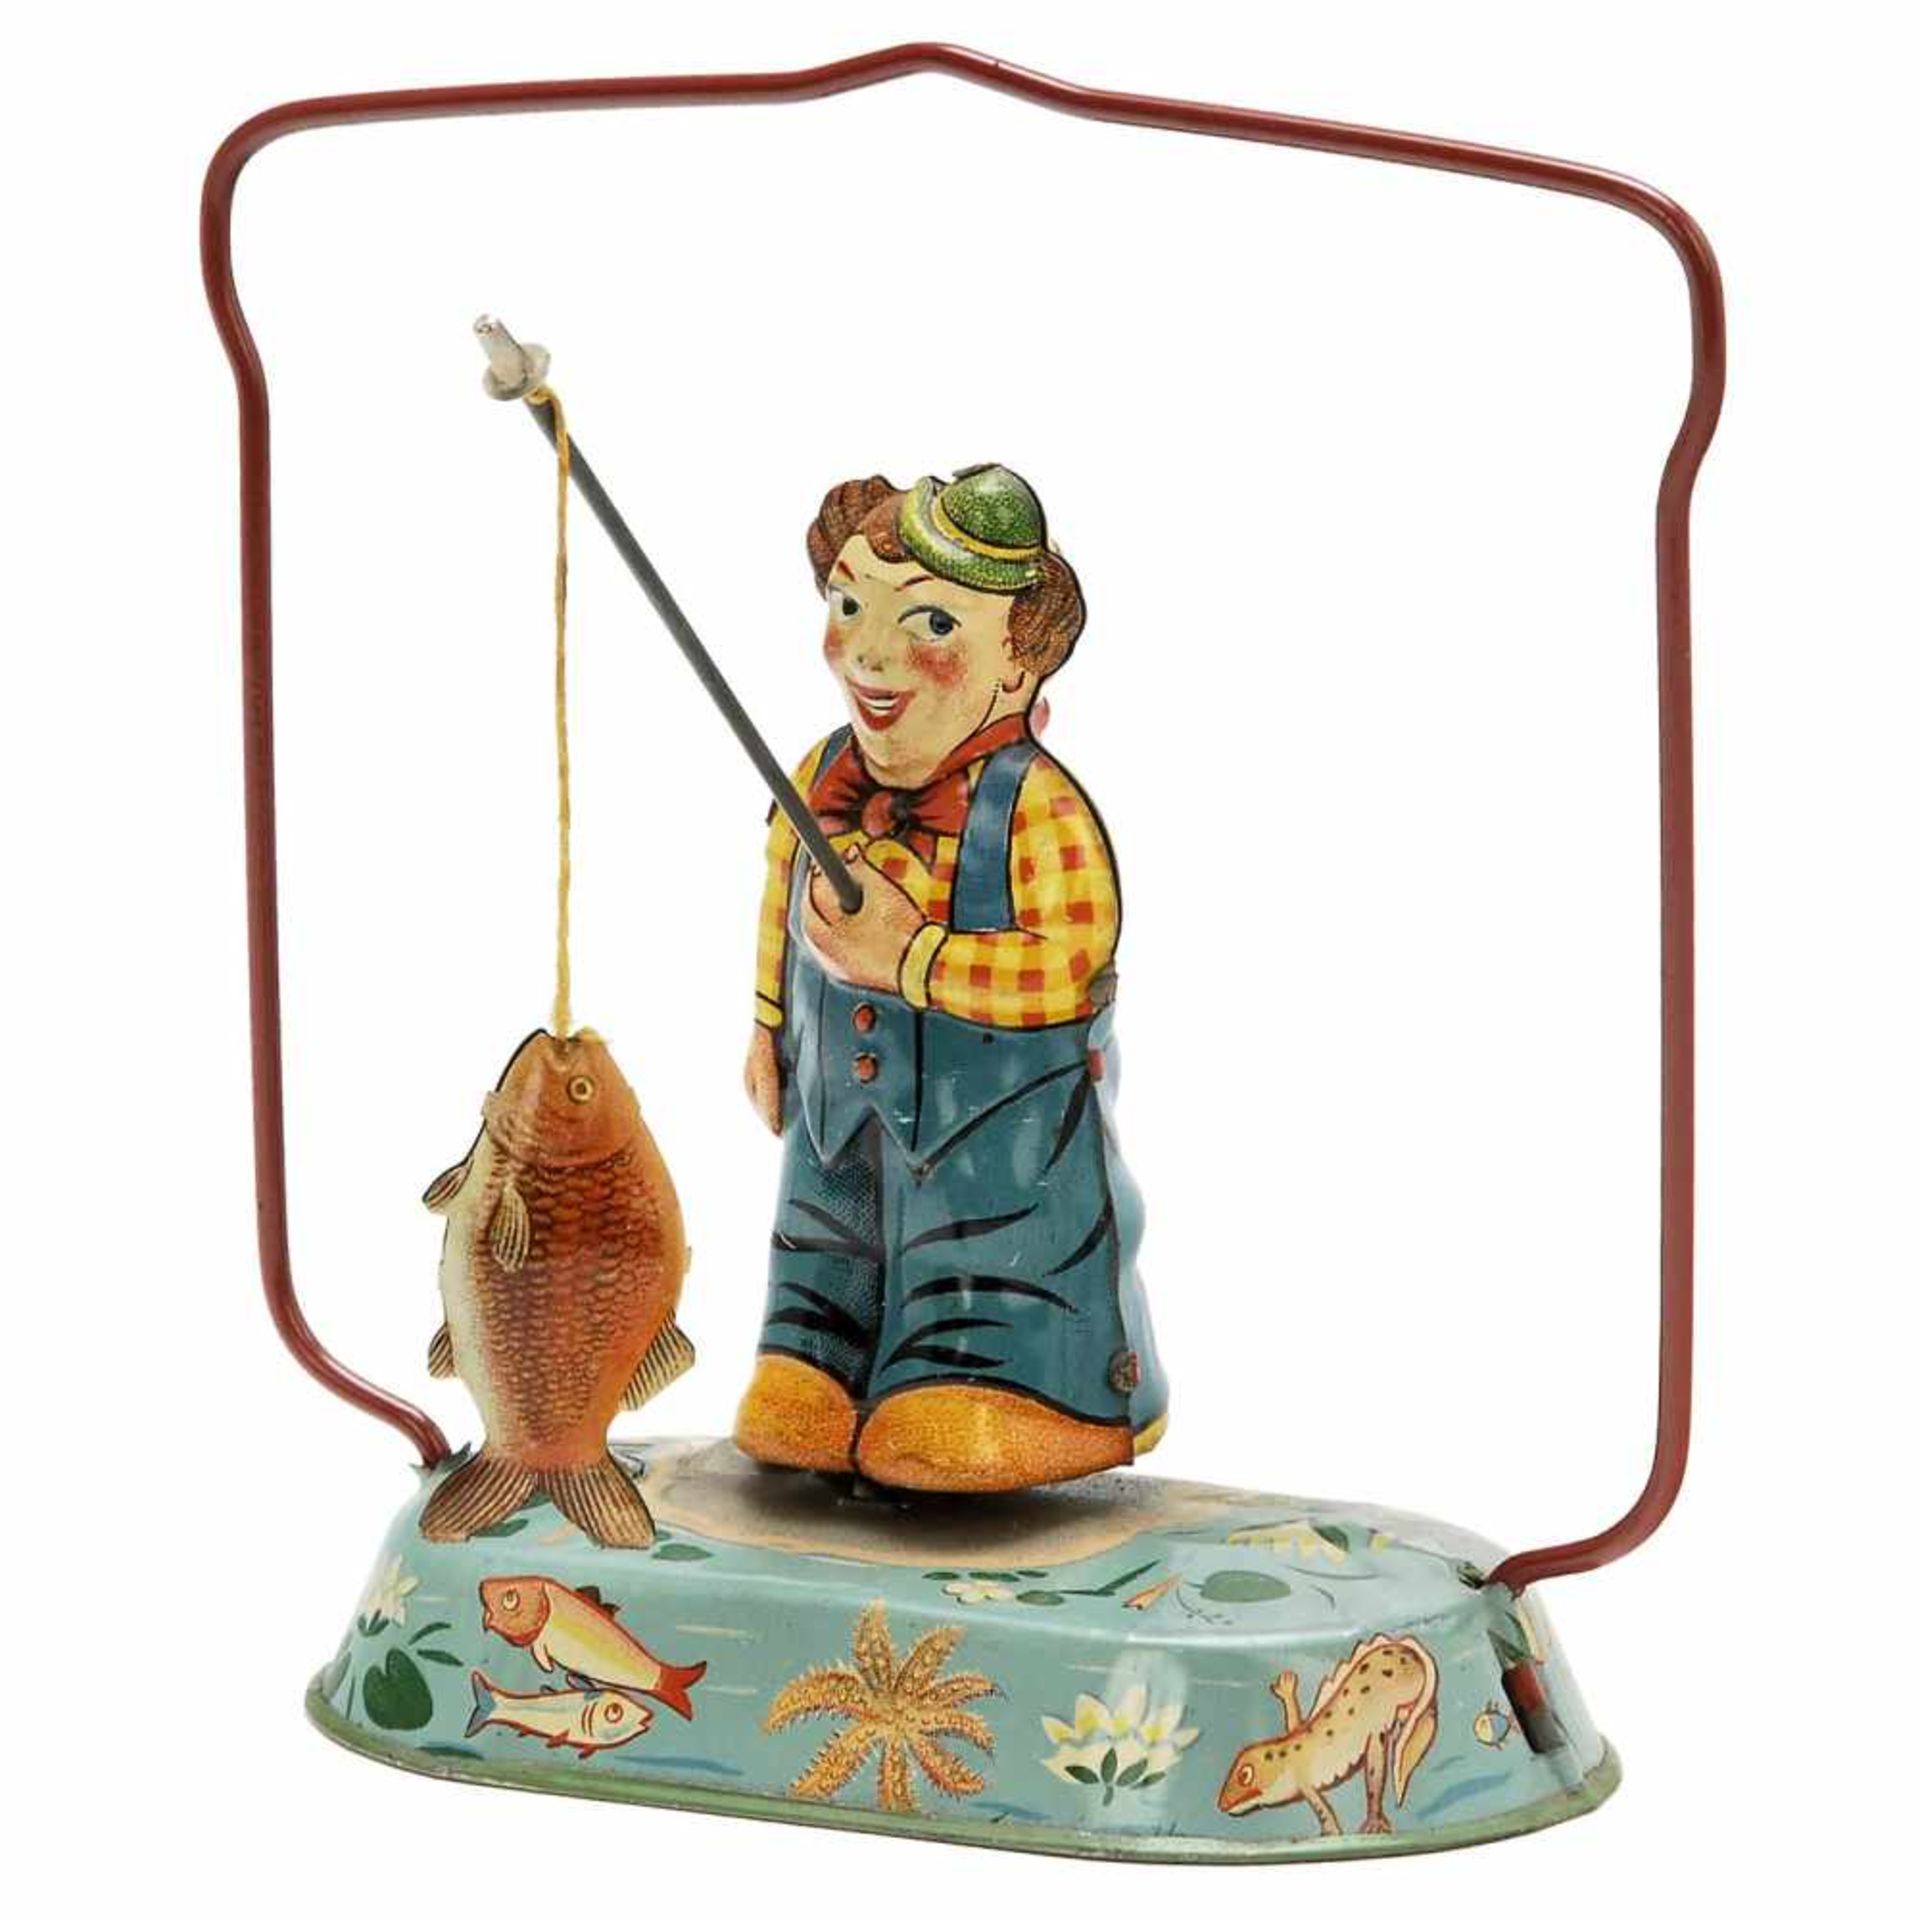 Angler with Fish Toy by Blomer & Schüler, c. 1950Nuremberg, Germany, lithographed tin, spring-driven